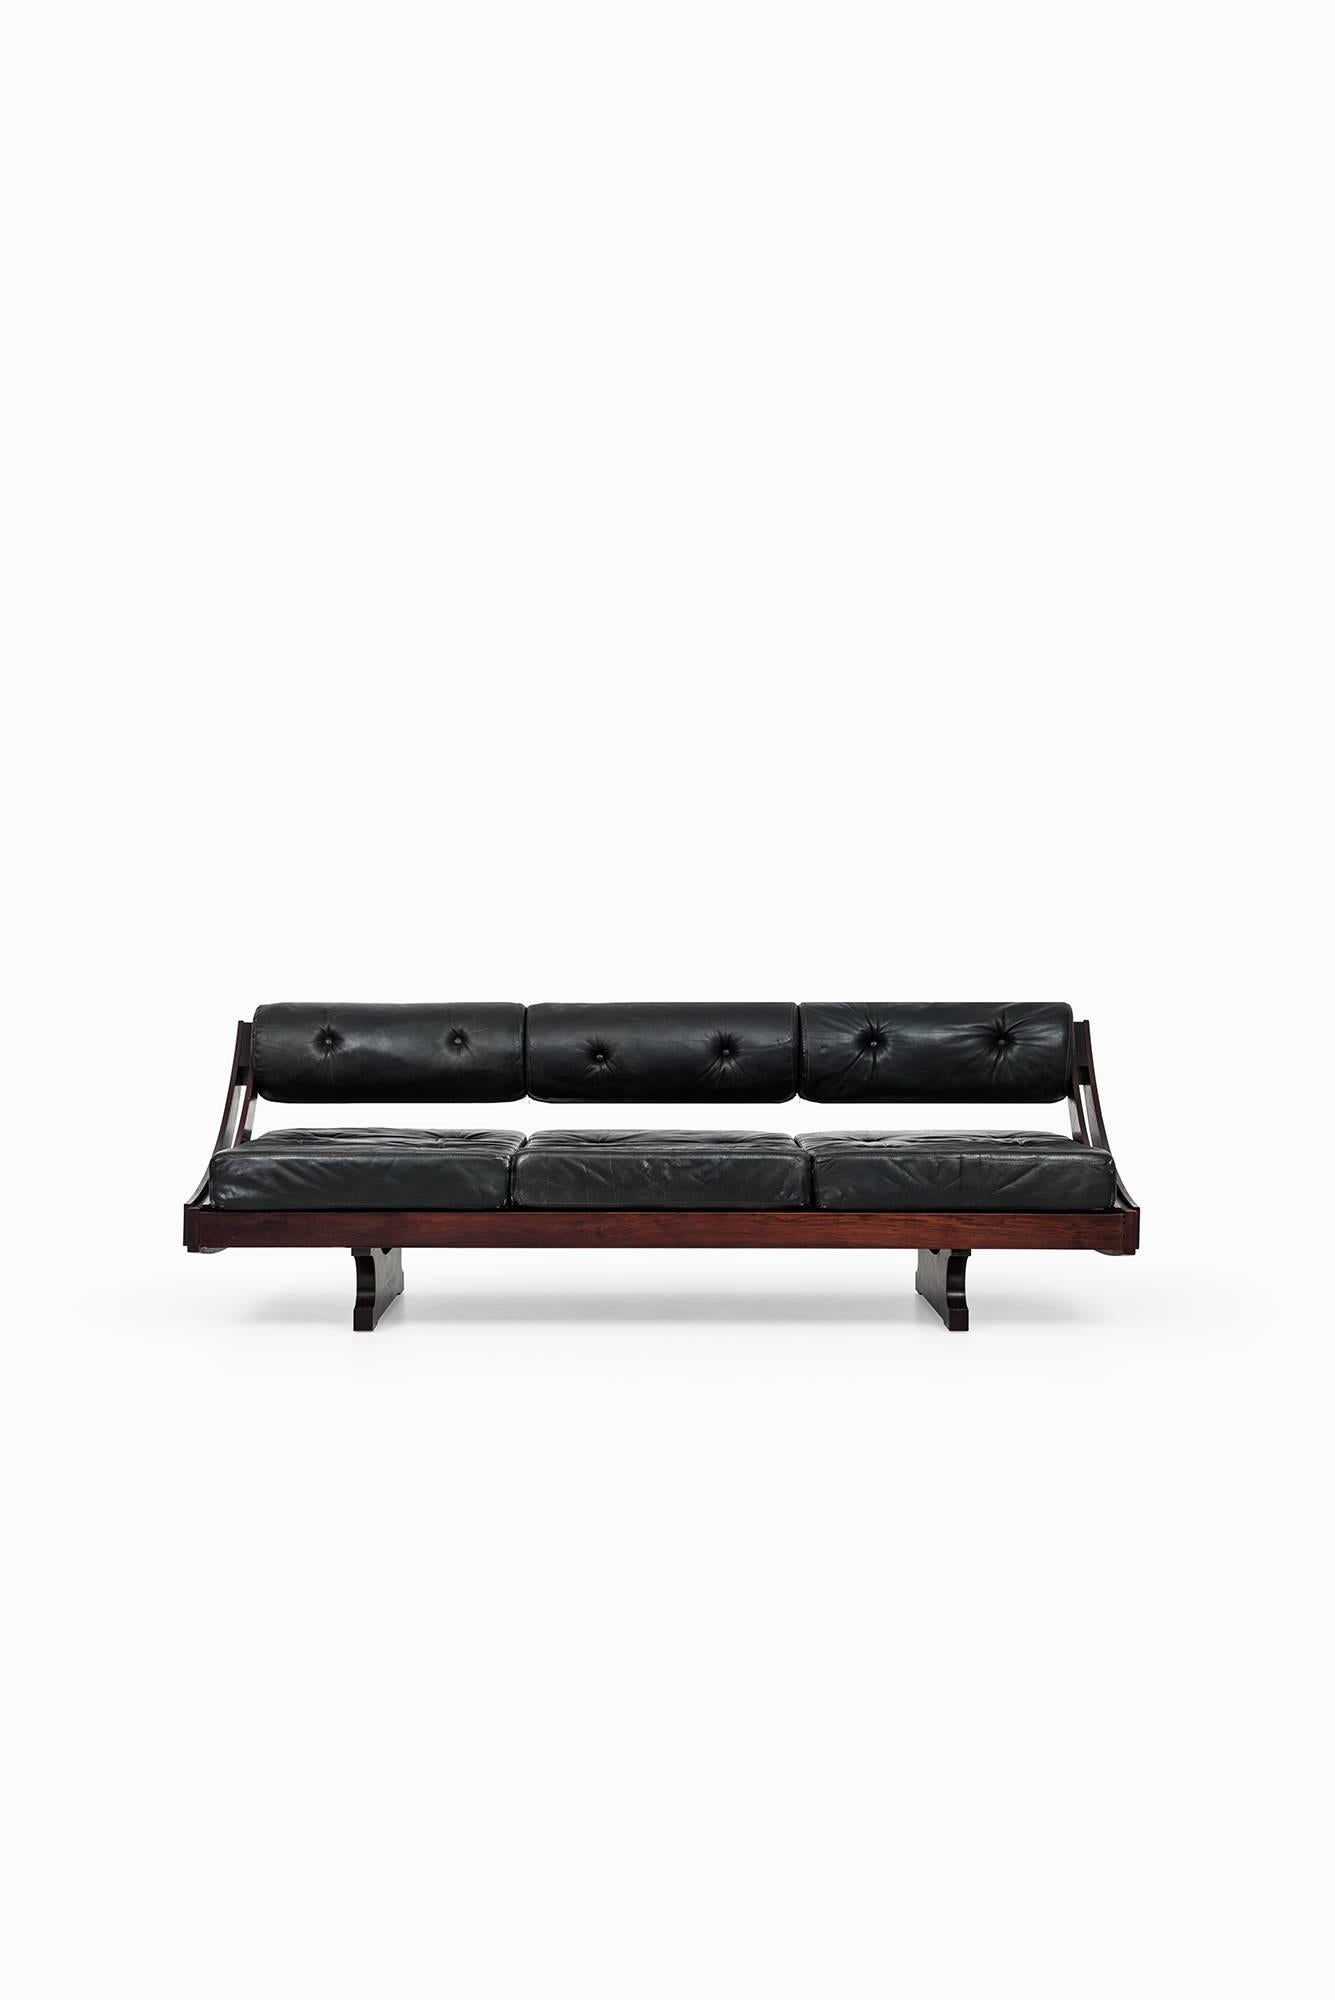 Italian Gianni Songia Daybed / Sofa Model GS 195 by Sormani in Italy For Sale